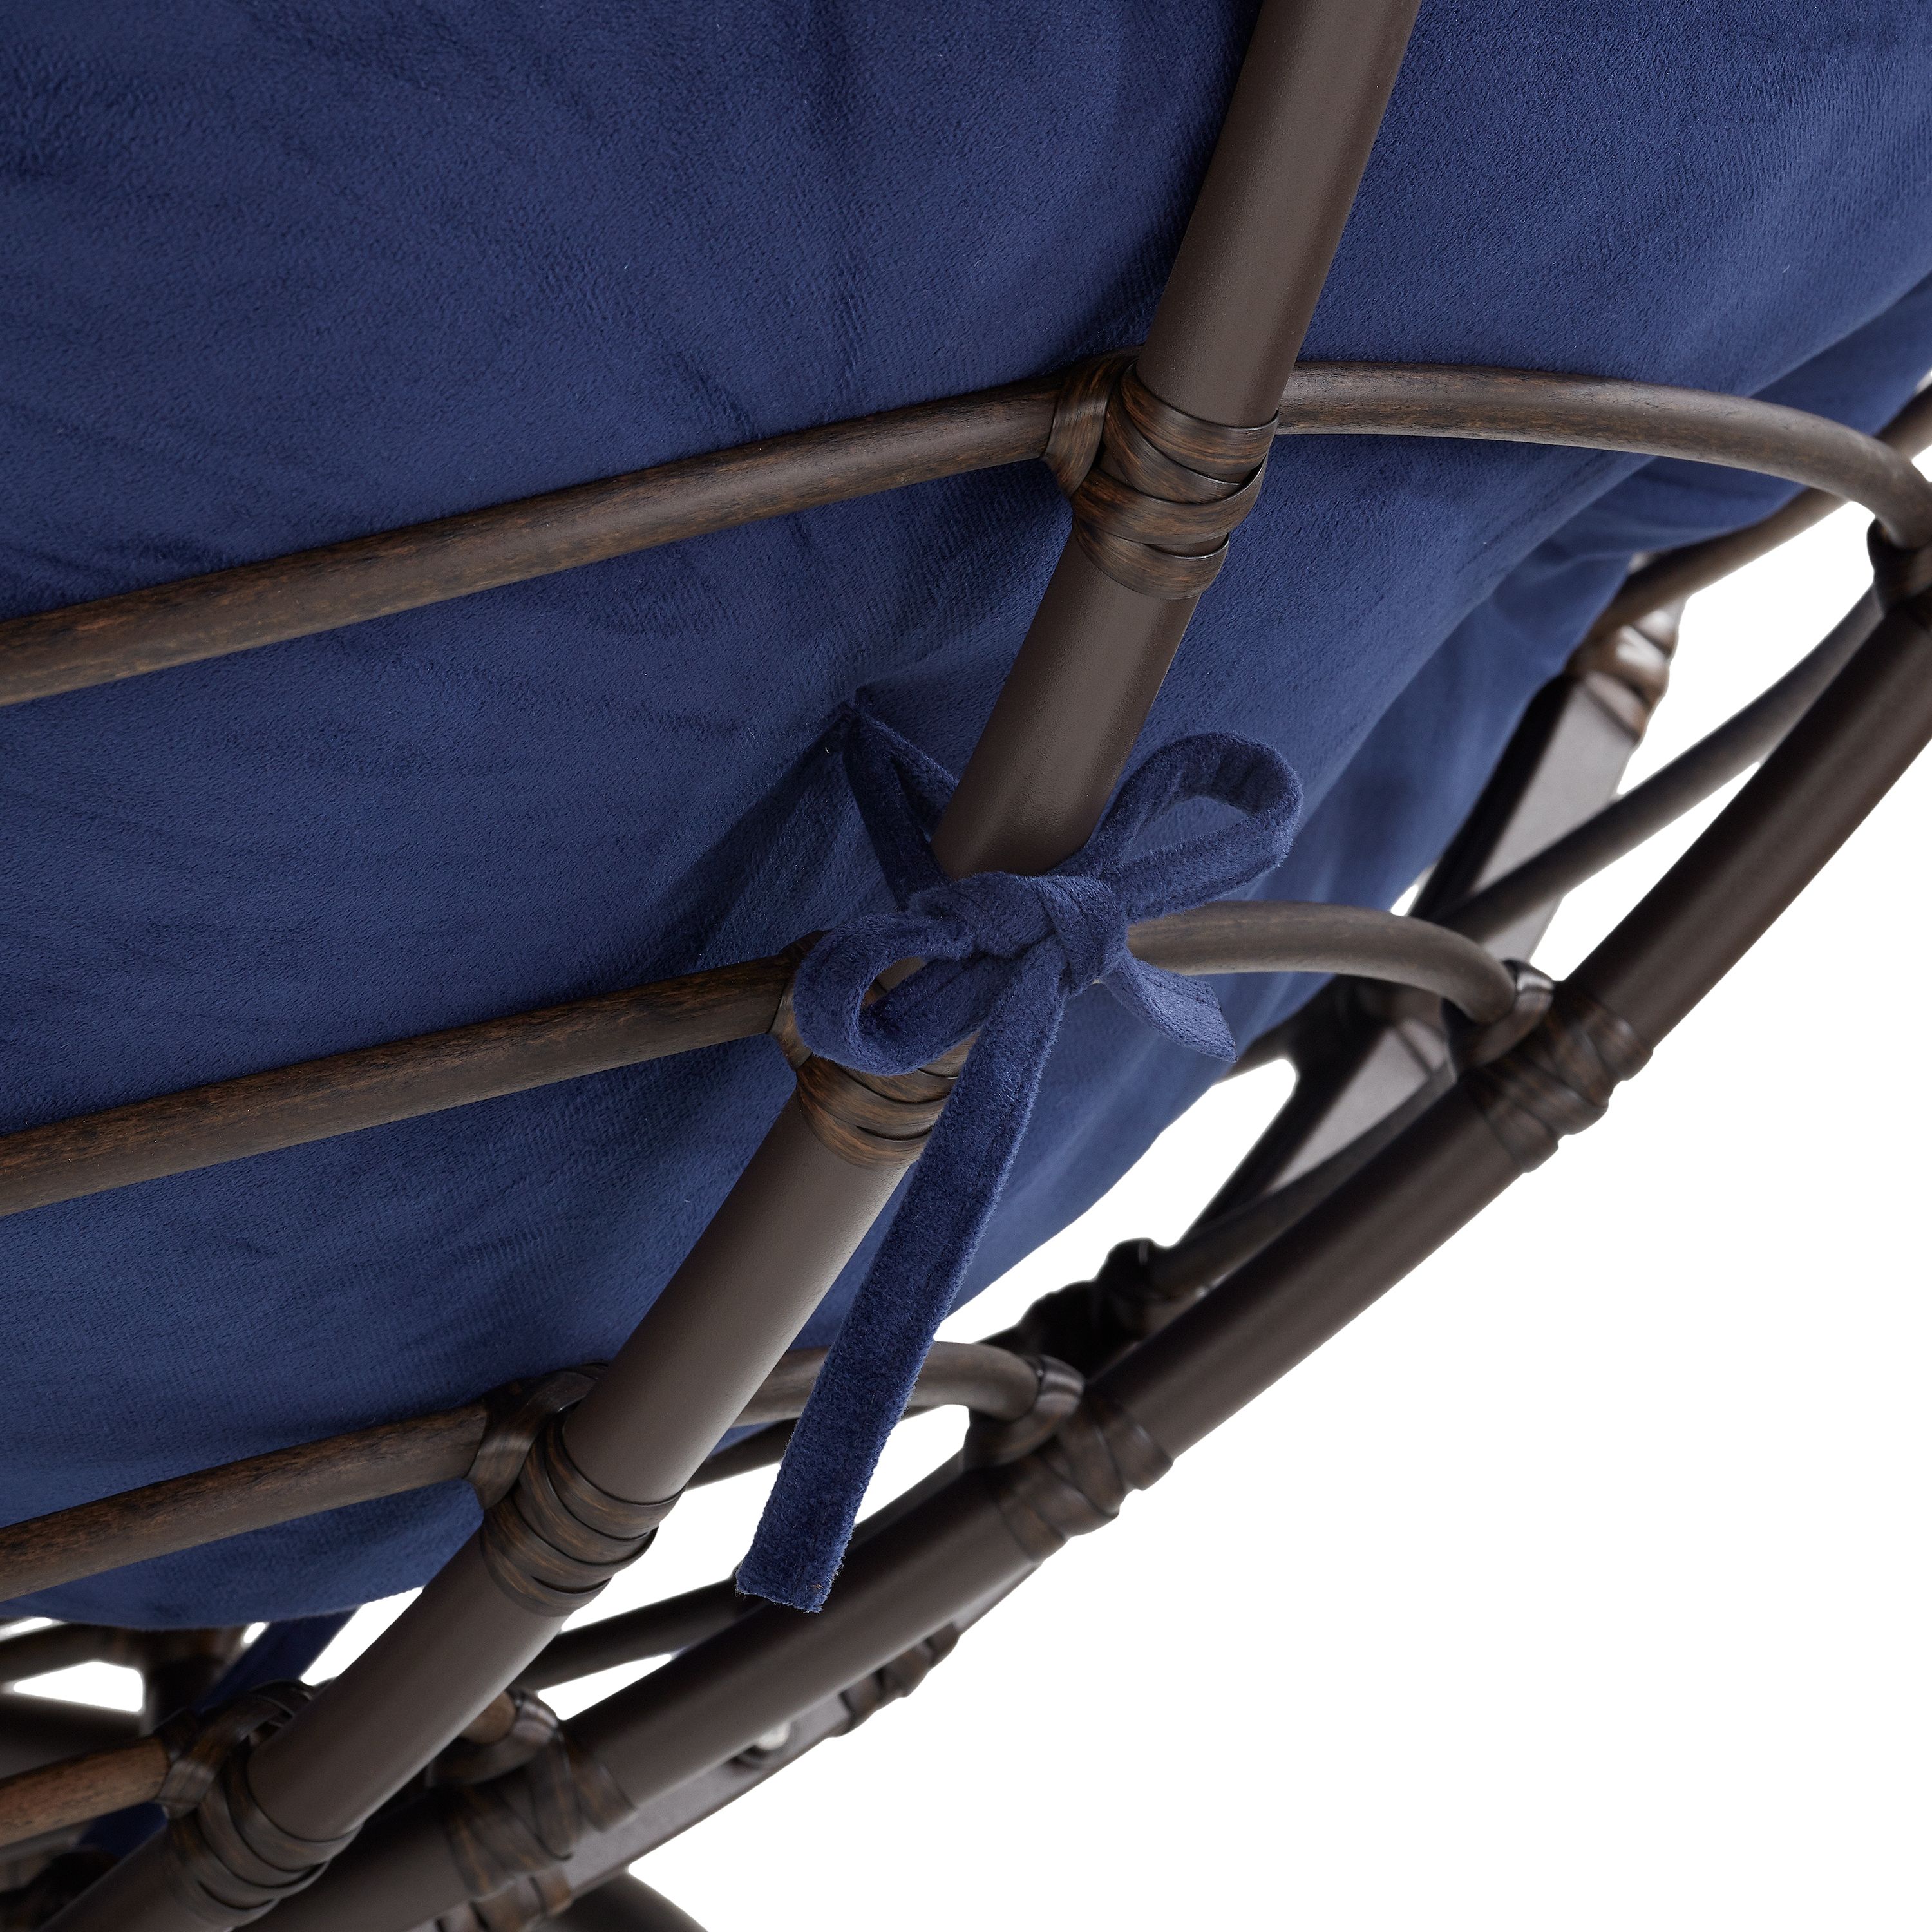 Better Homes & Gardens Double Papasan Chair, Navy Blue - image 5 of 5